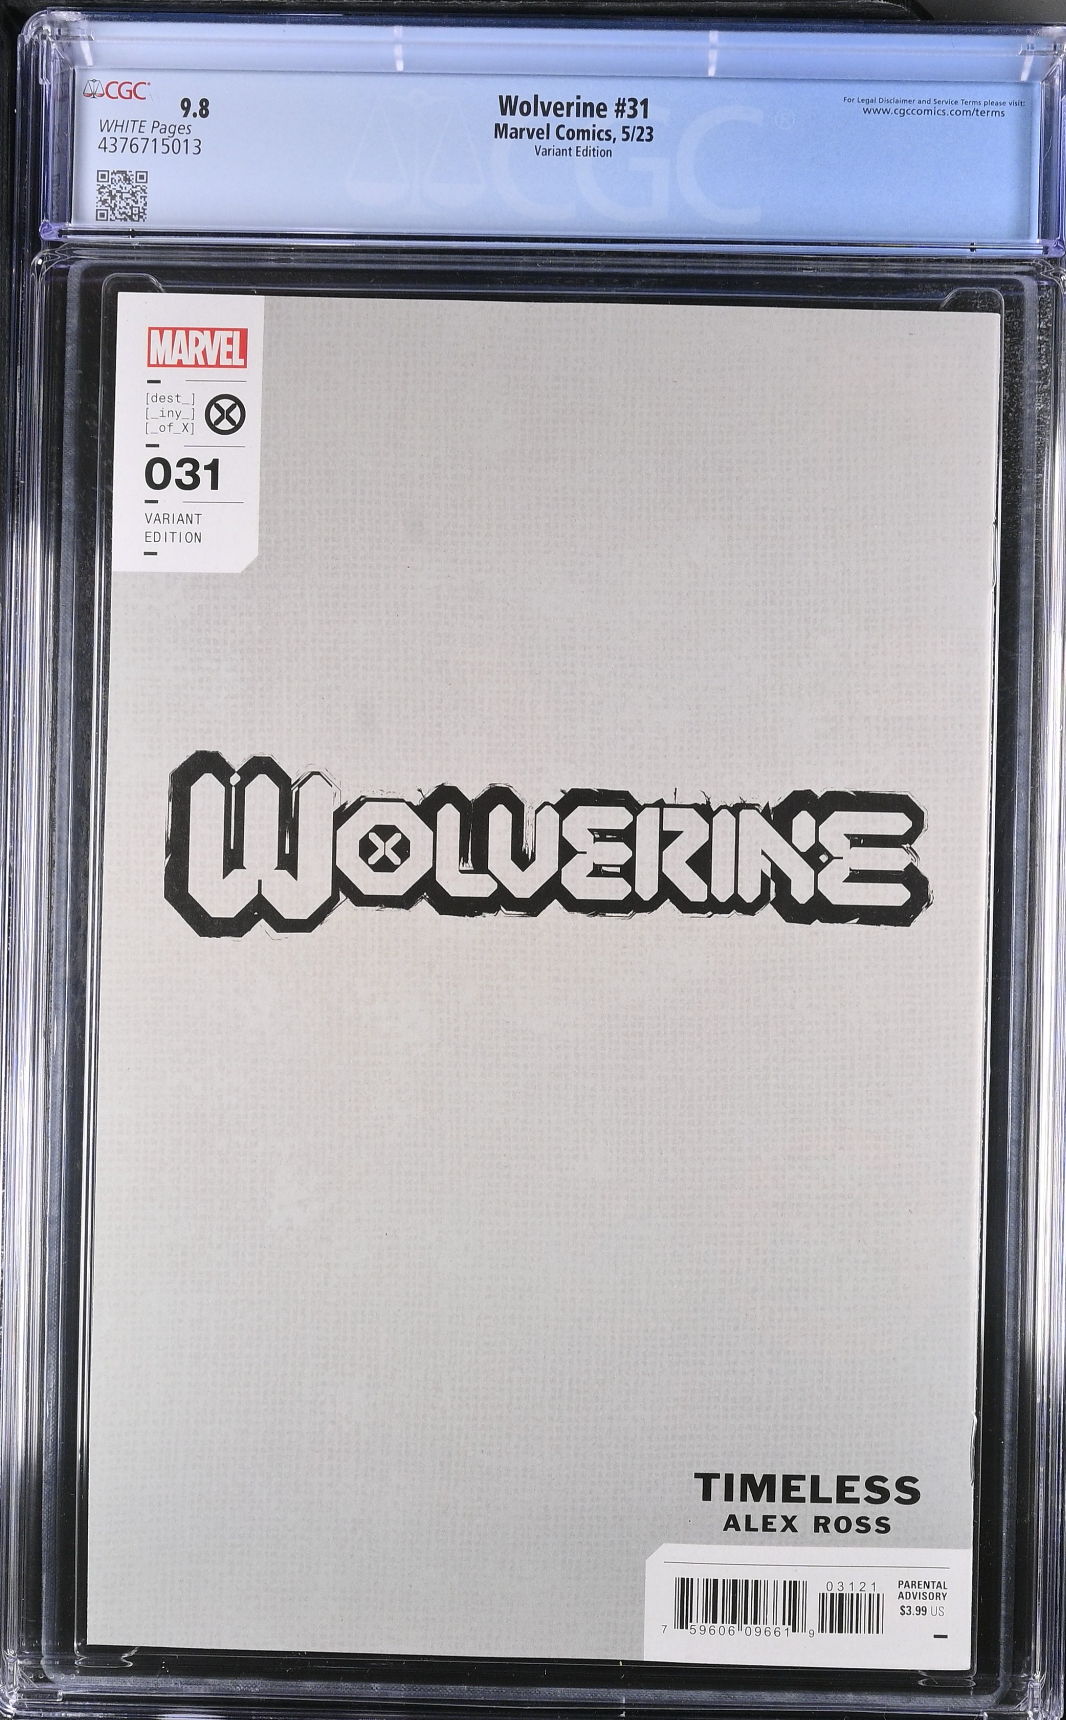 Wolverine #31 Alex Ross Emma Frost "Timeless" Variant CGC 9.8